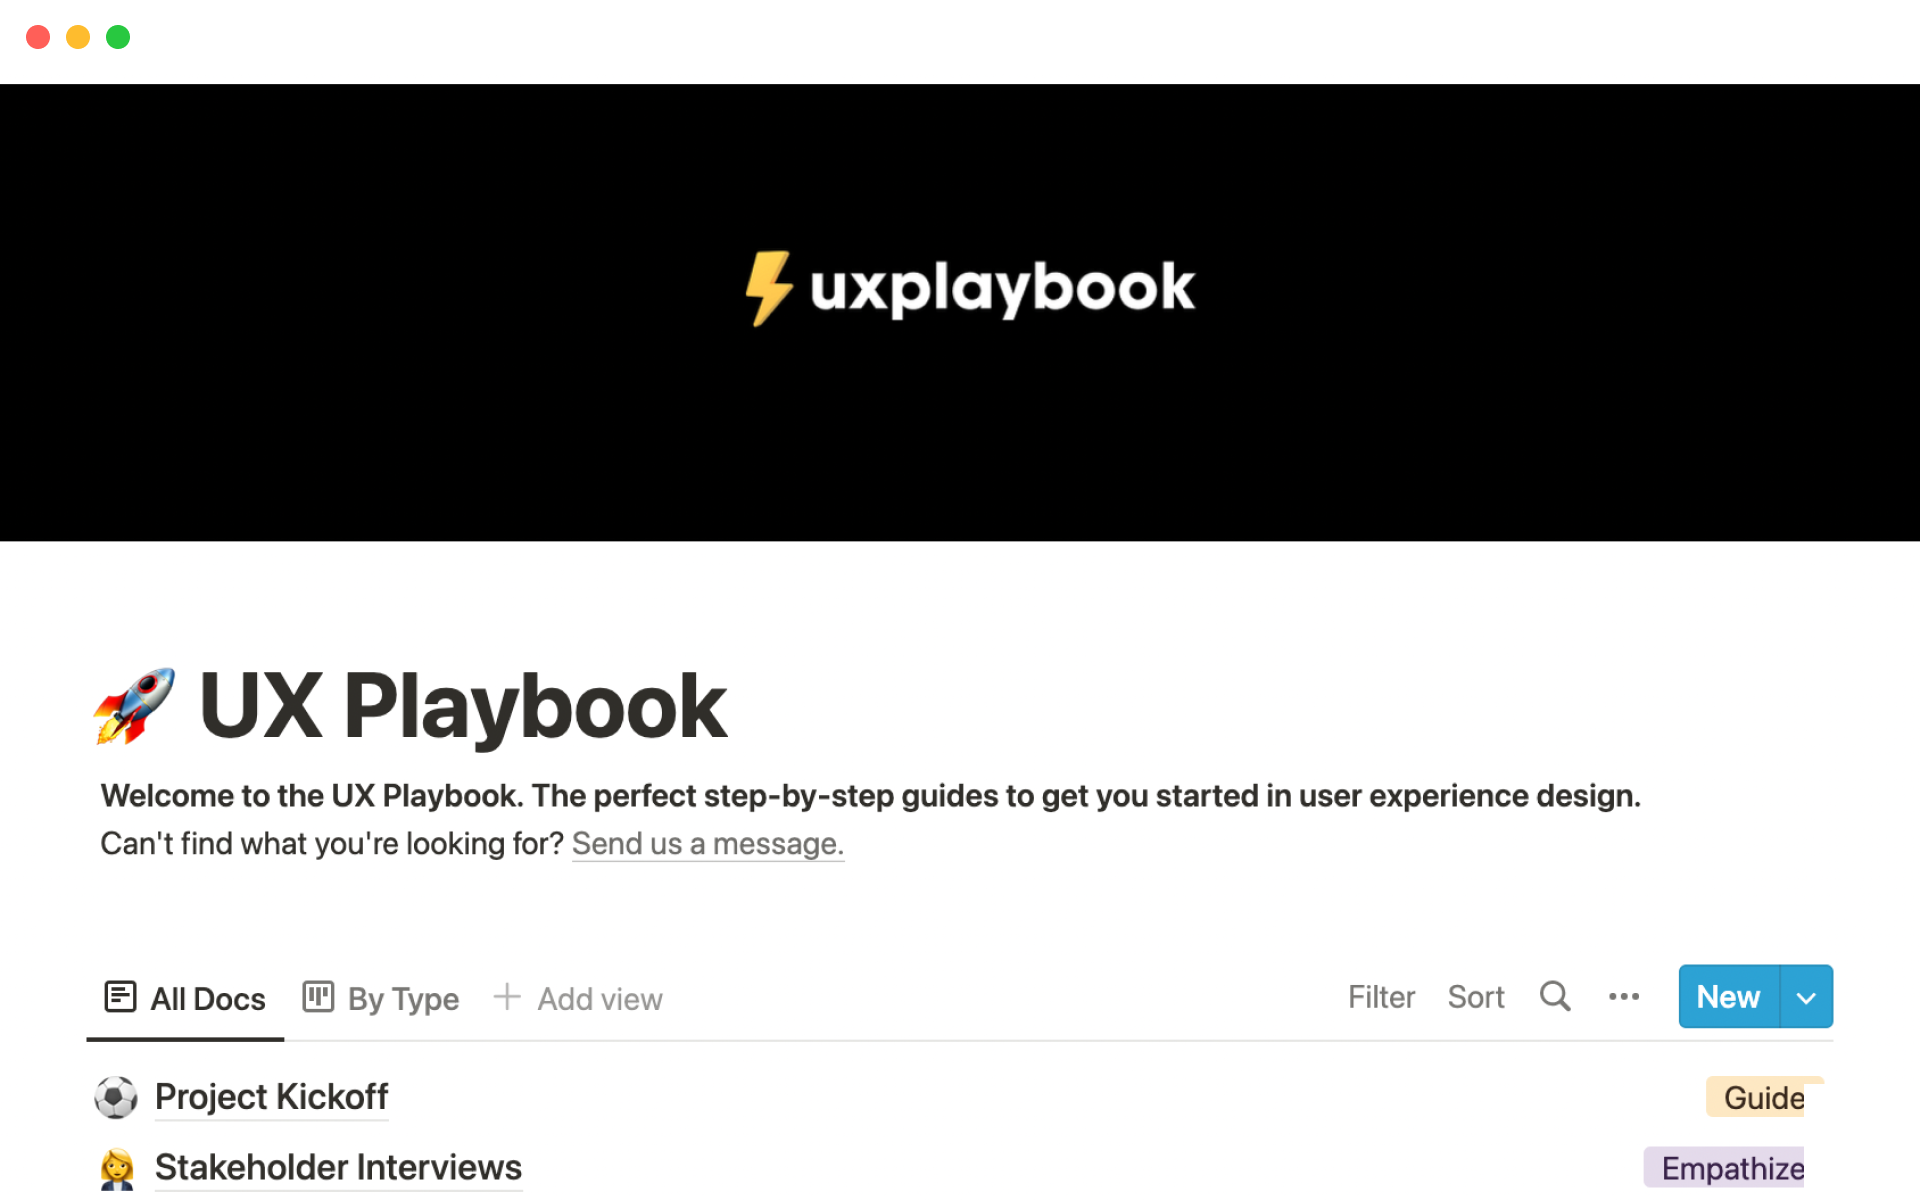 An all-in-one toolbox for UX designers with step-by-step guides and templates.